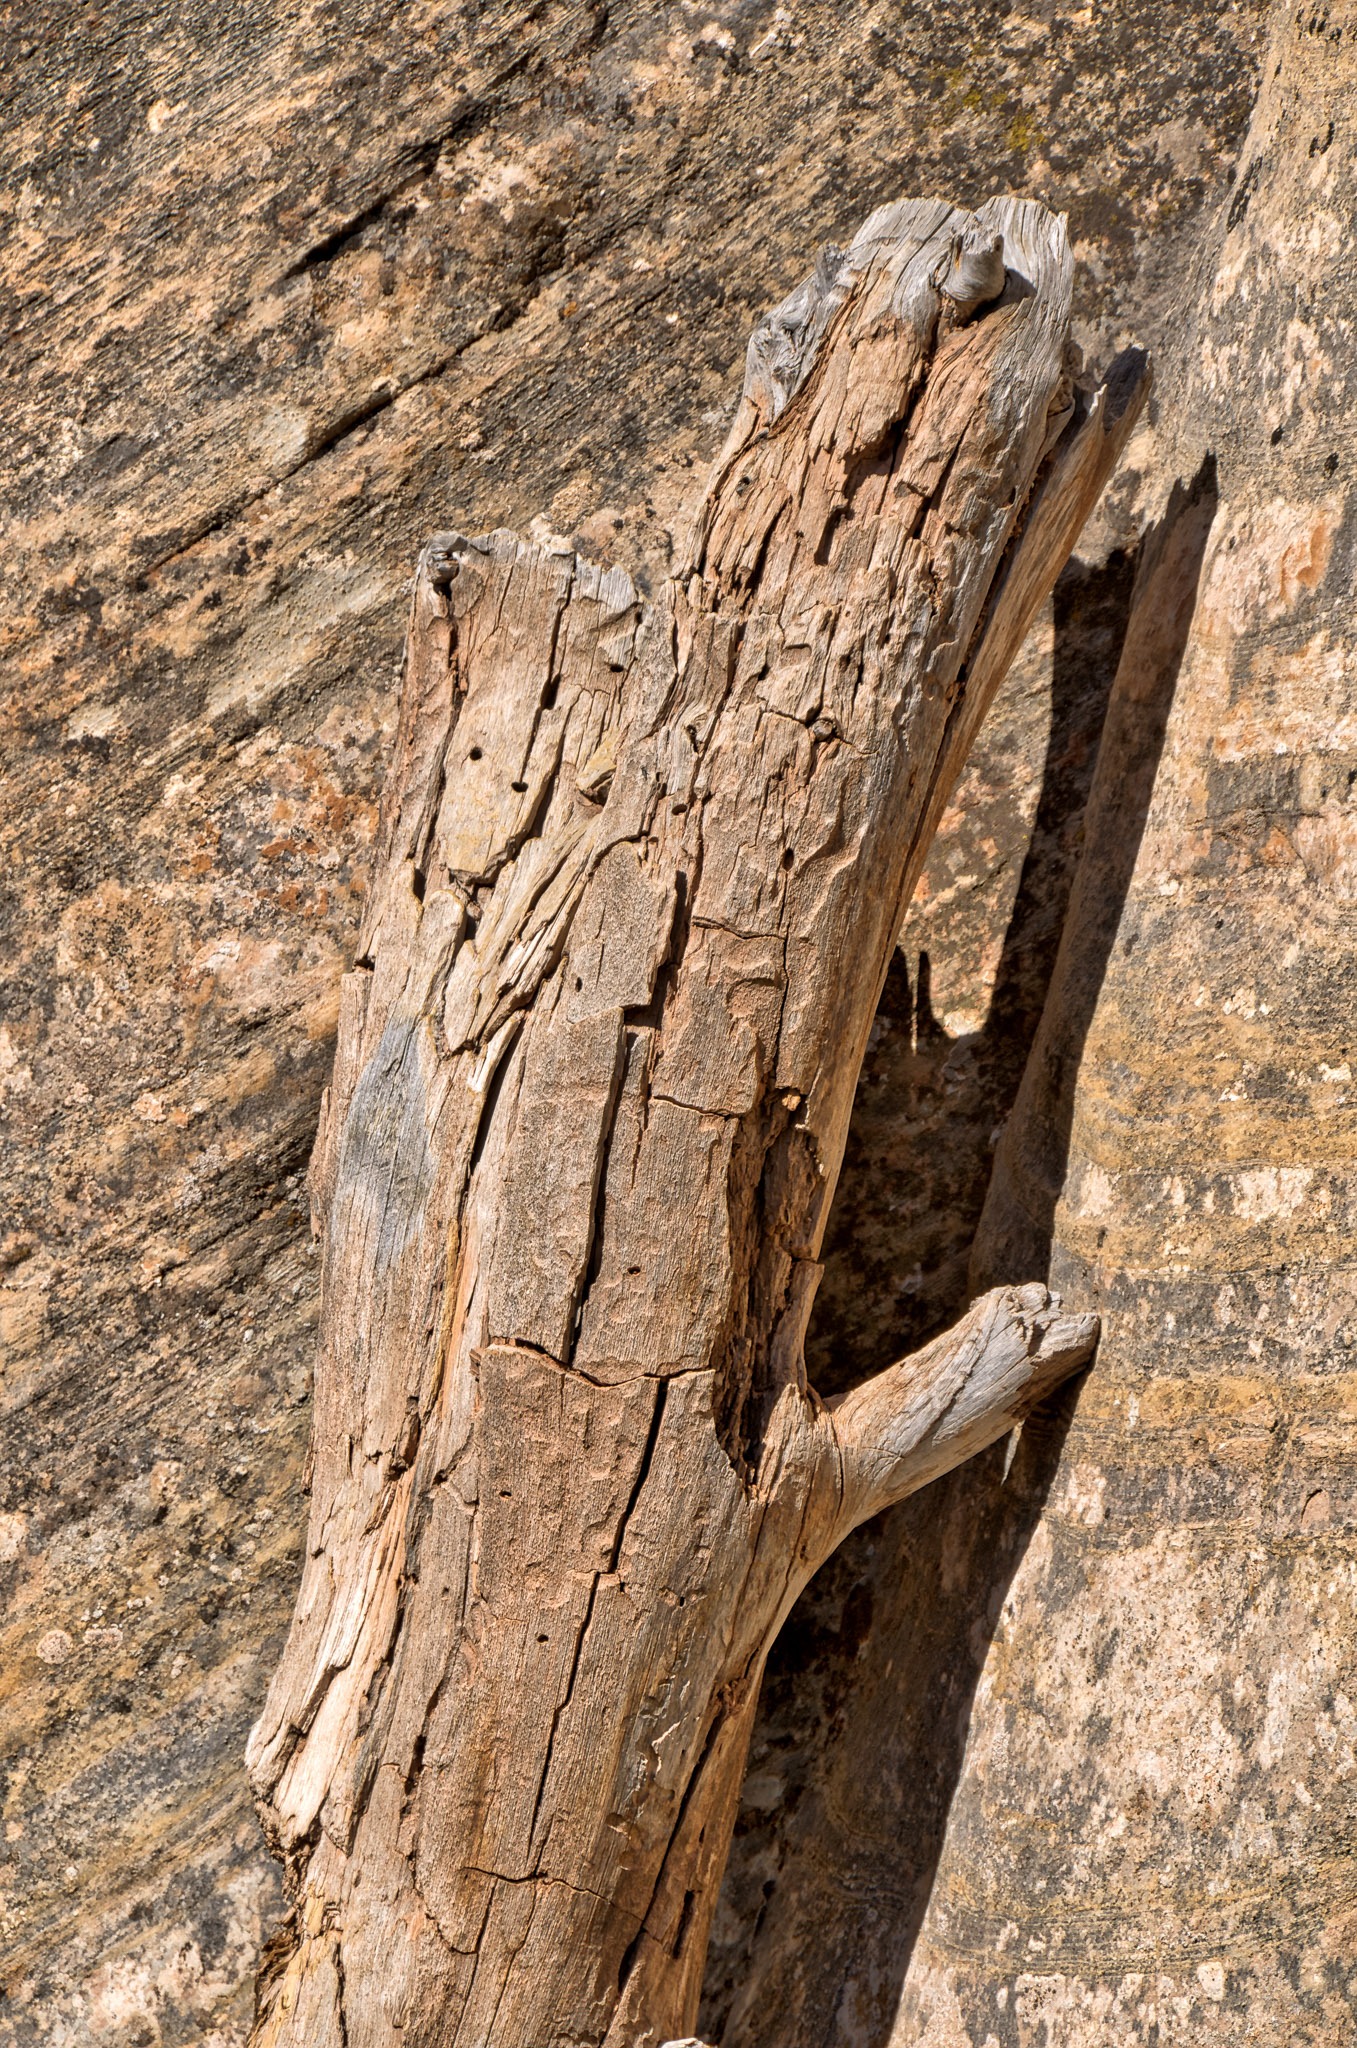 An old wood loog is propped up against similarly colored Wingate Sandstone along Upper Muley Twist Canyon Road, off Burr Trail in Capitol Reef National Park, Utah.